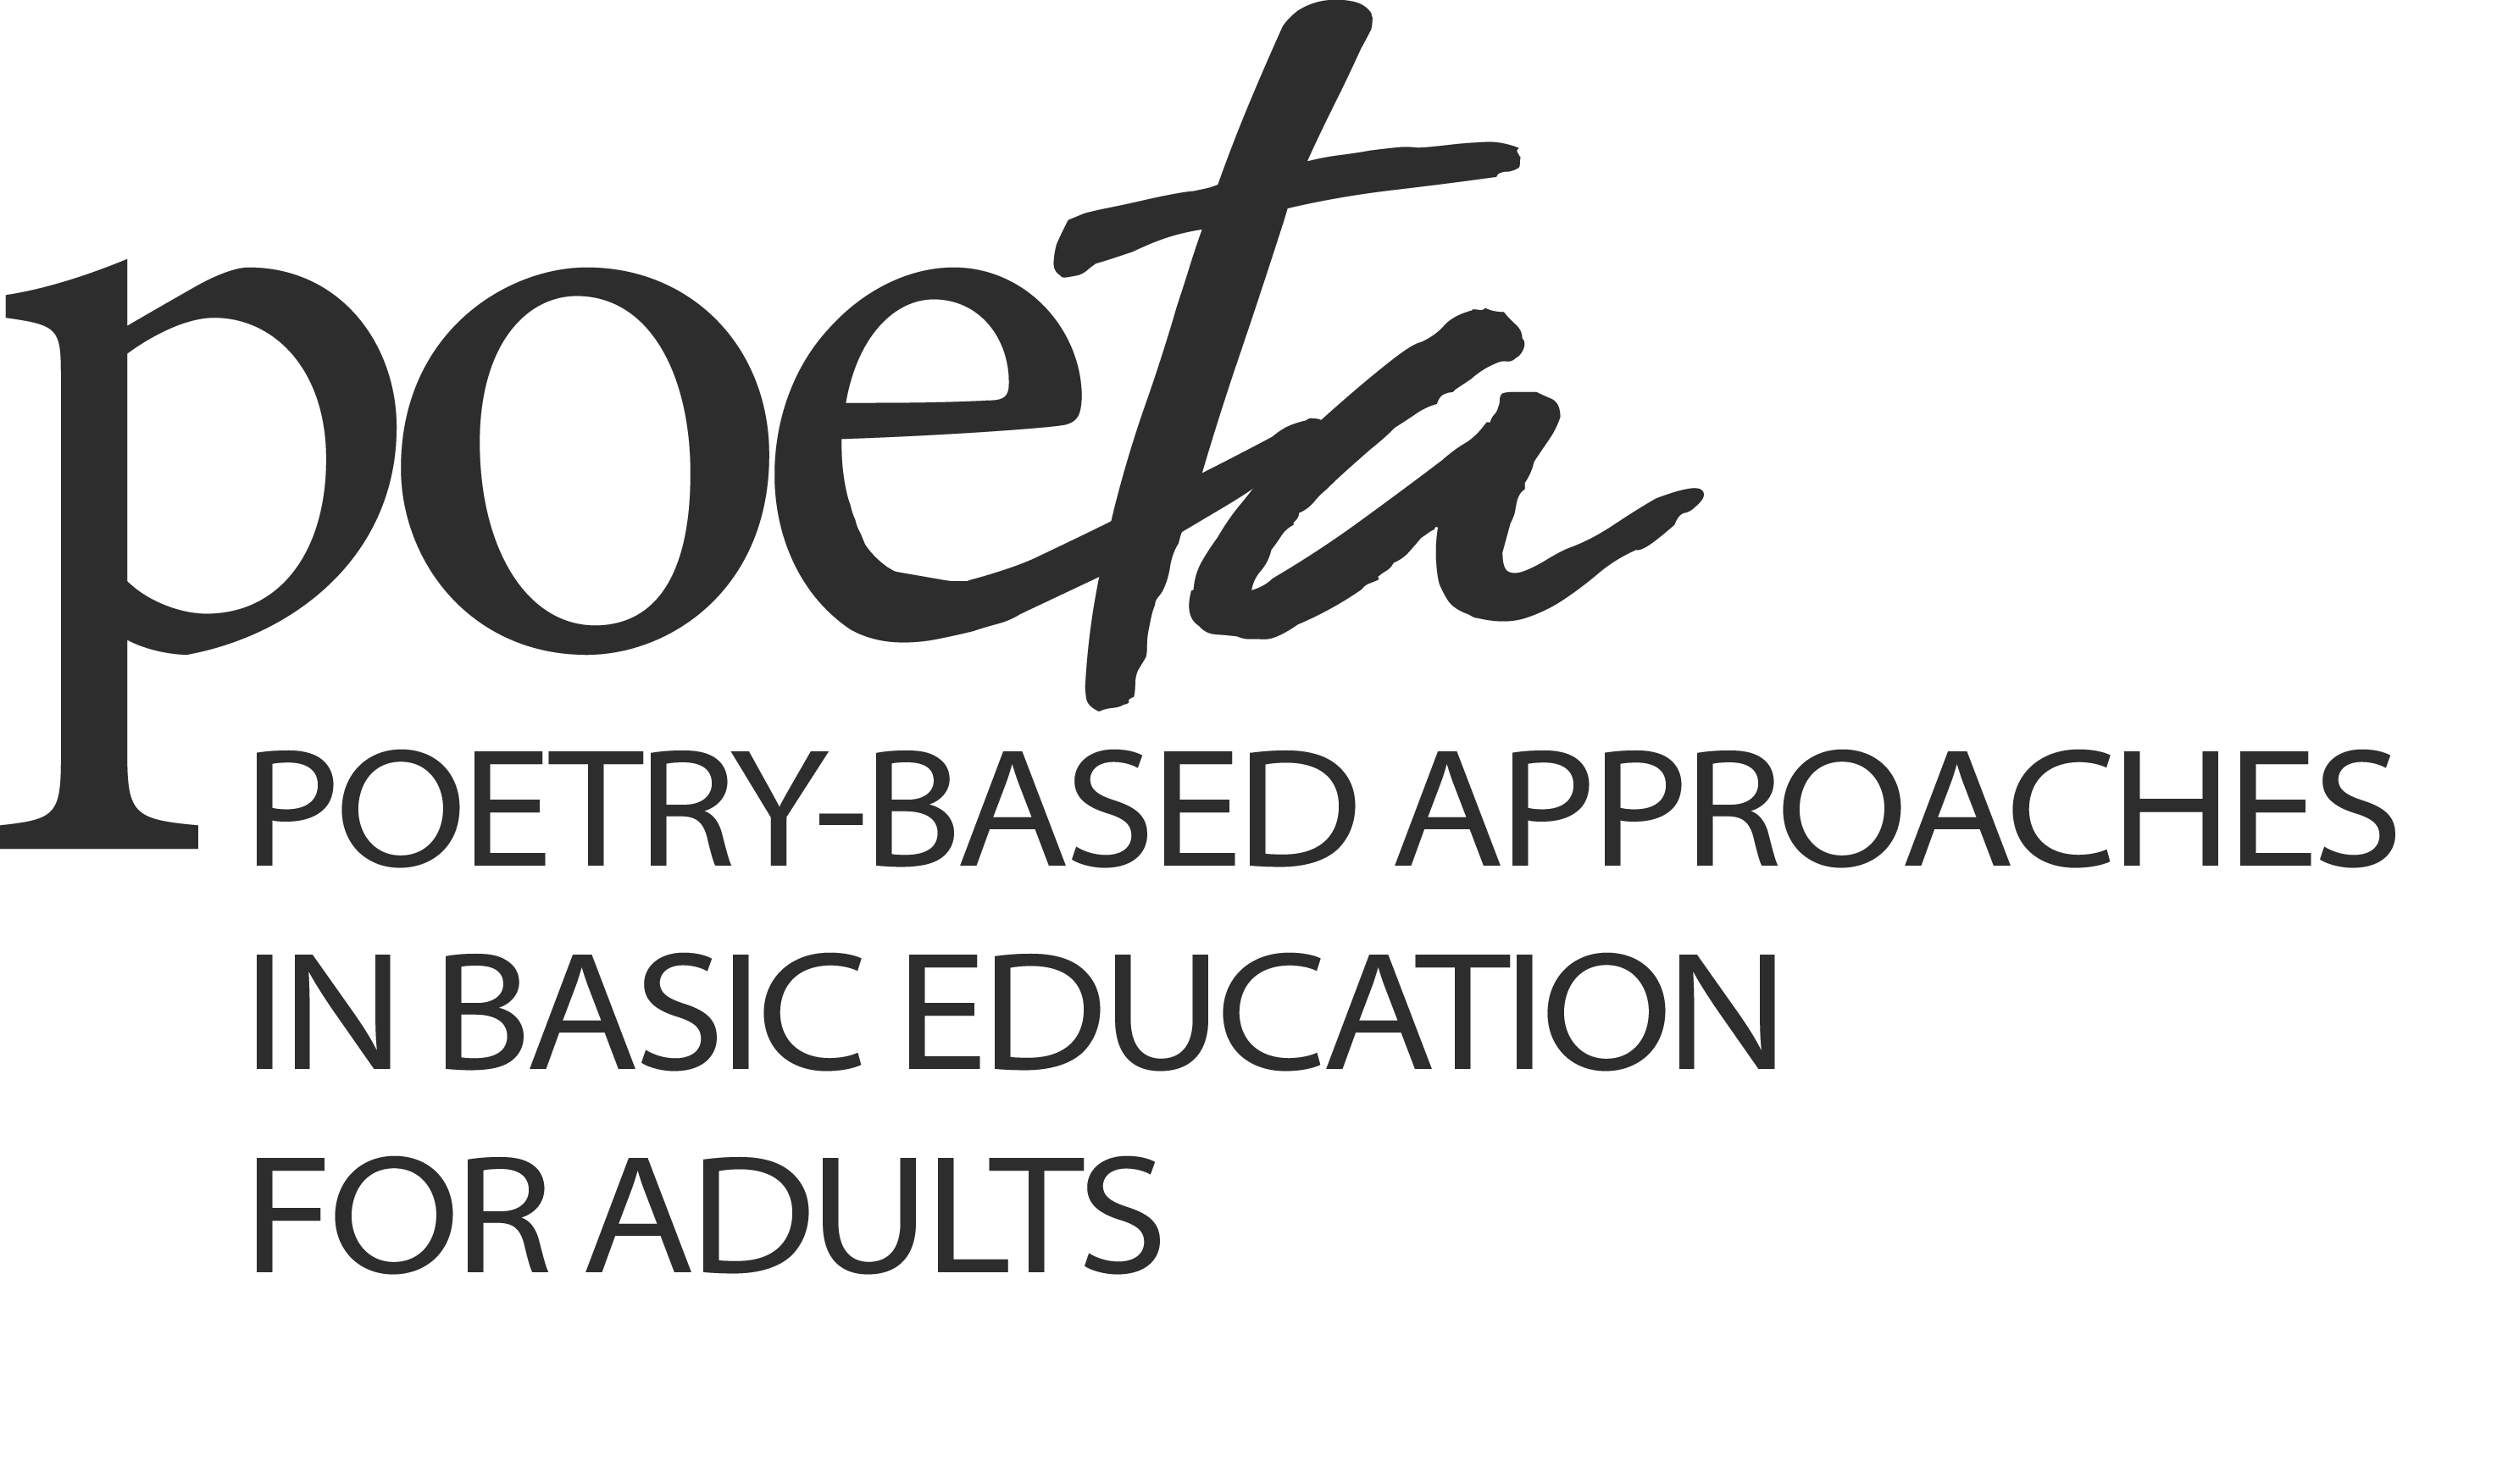 Poetry-based approaches in basic education for adults